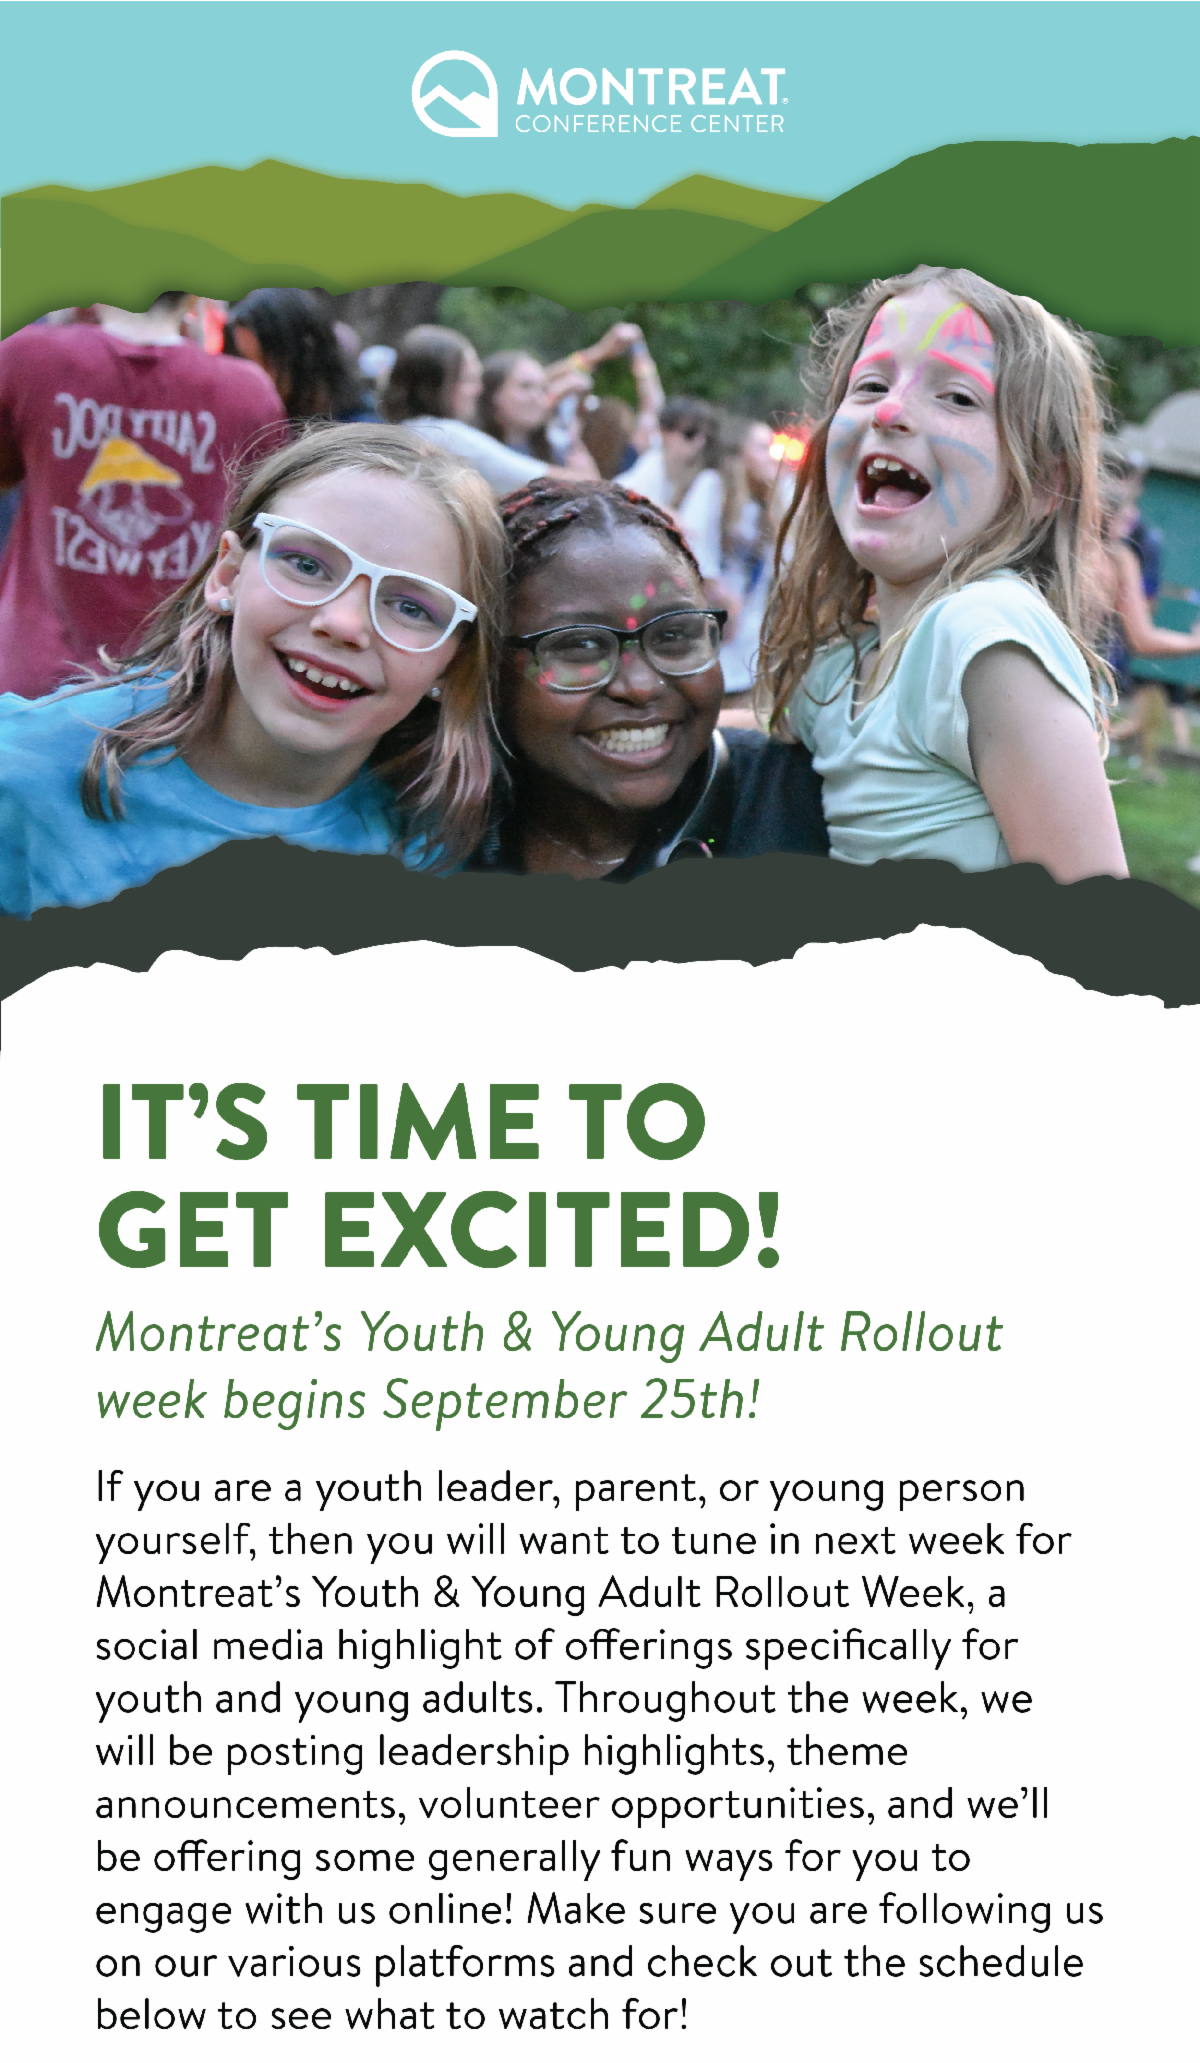 It's time to get excited! Montreat's Youth & Young Adult Rollout Week begins September 25th! - If you are a youth leader, parent, or young person yourself, then you will want to tune in next week for Montreat’s Youth & Young Adult Rollout Week, a social media highlight of offerings specifically for youth and young adults. Throughout the week, we will be posting leadership highlights, theme announcements, volunteer opportunities, and we’ll be offering some generally fun ways for you to engage with us online! Make sure you are following us on our various platforms and check out the schedule below to see what to watch for! 